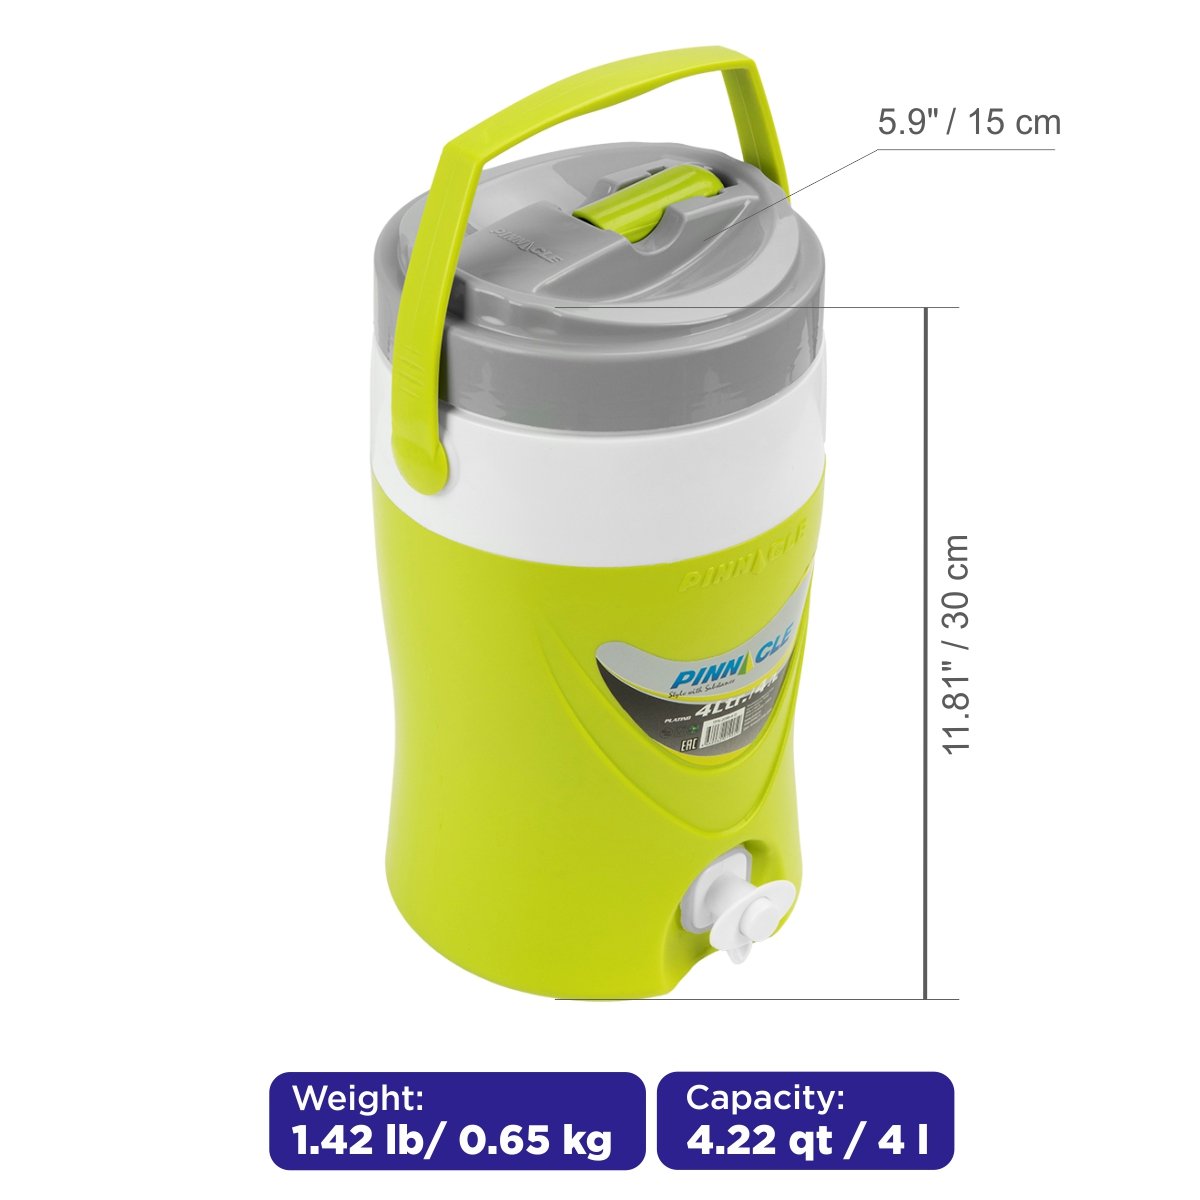 Platino Beverage Cooler Jug with Spigot for Picnics, Camping, 4 qt weighs only 1.42 lbs, it is 11.8 inches high and almost 6 inches wide. 